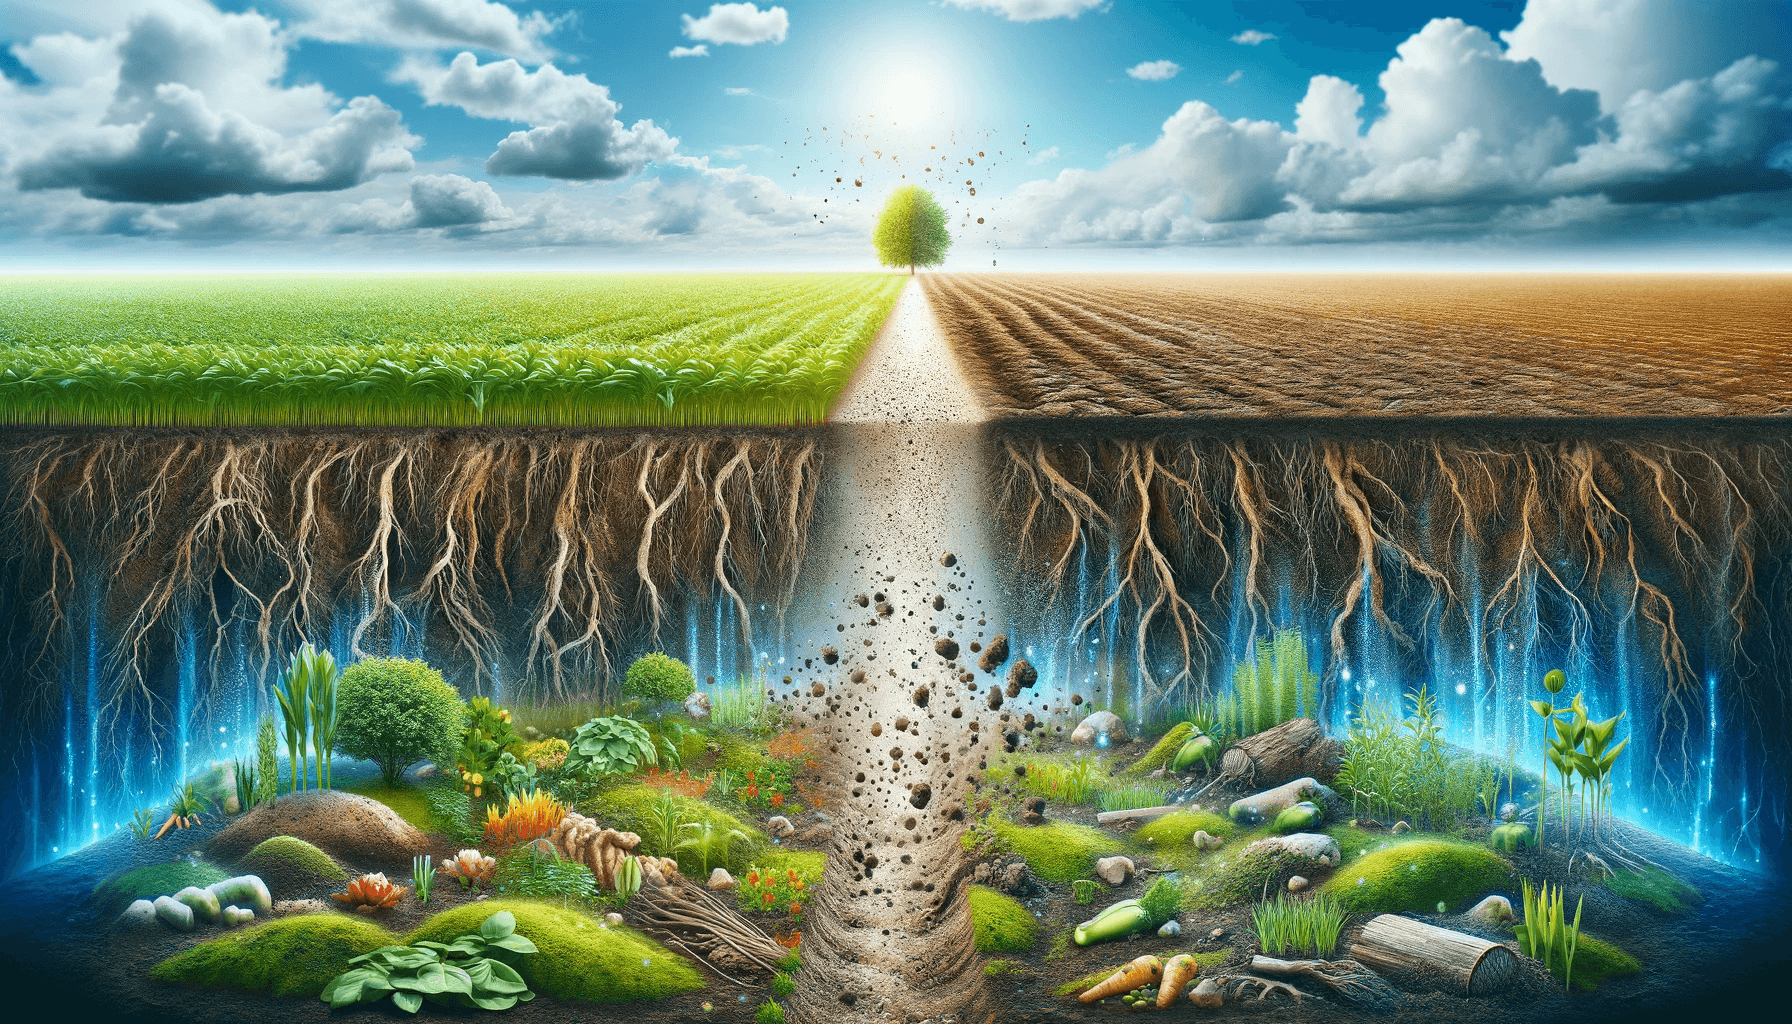 An impactful image showing the process of soil remediation with the use of fulvic acid